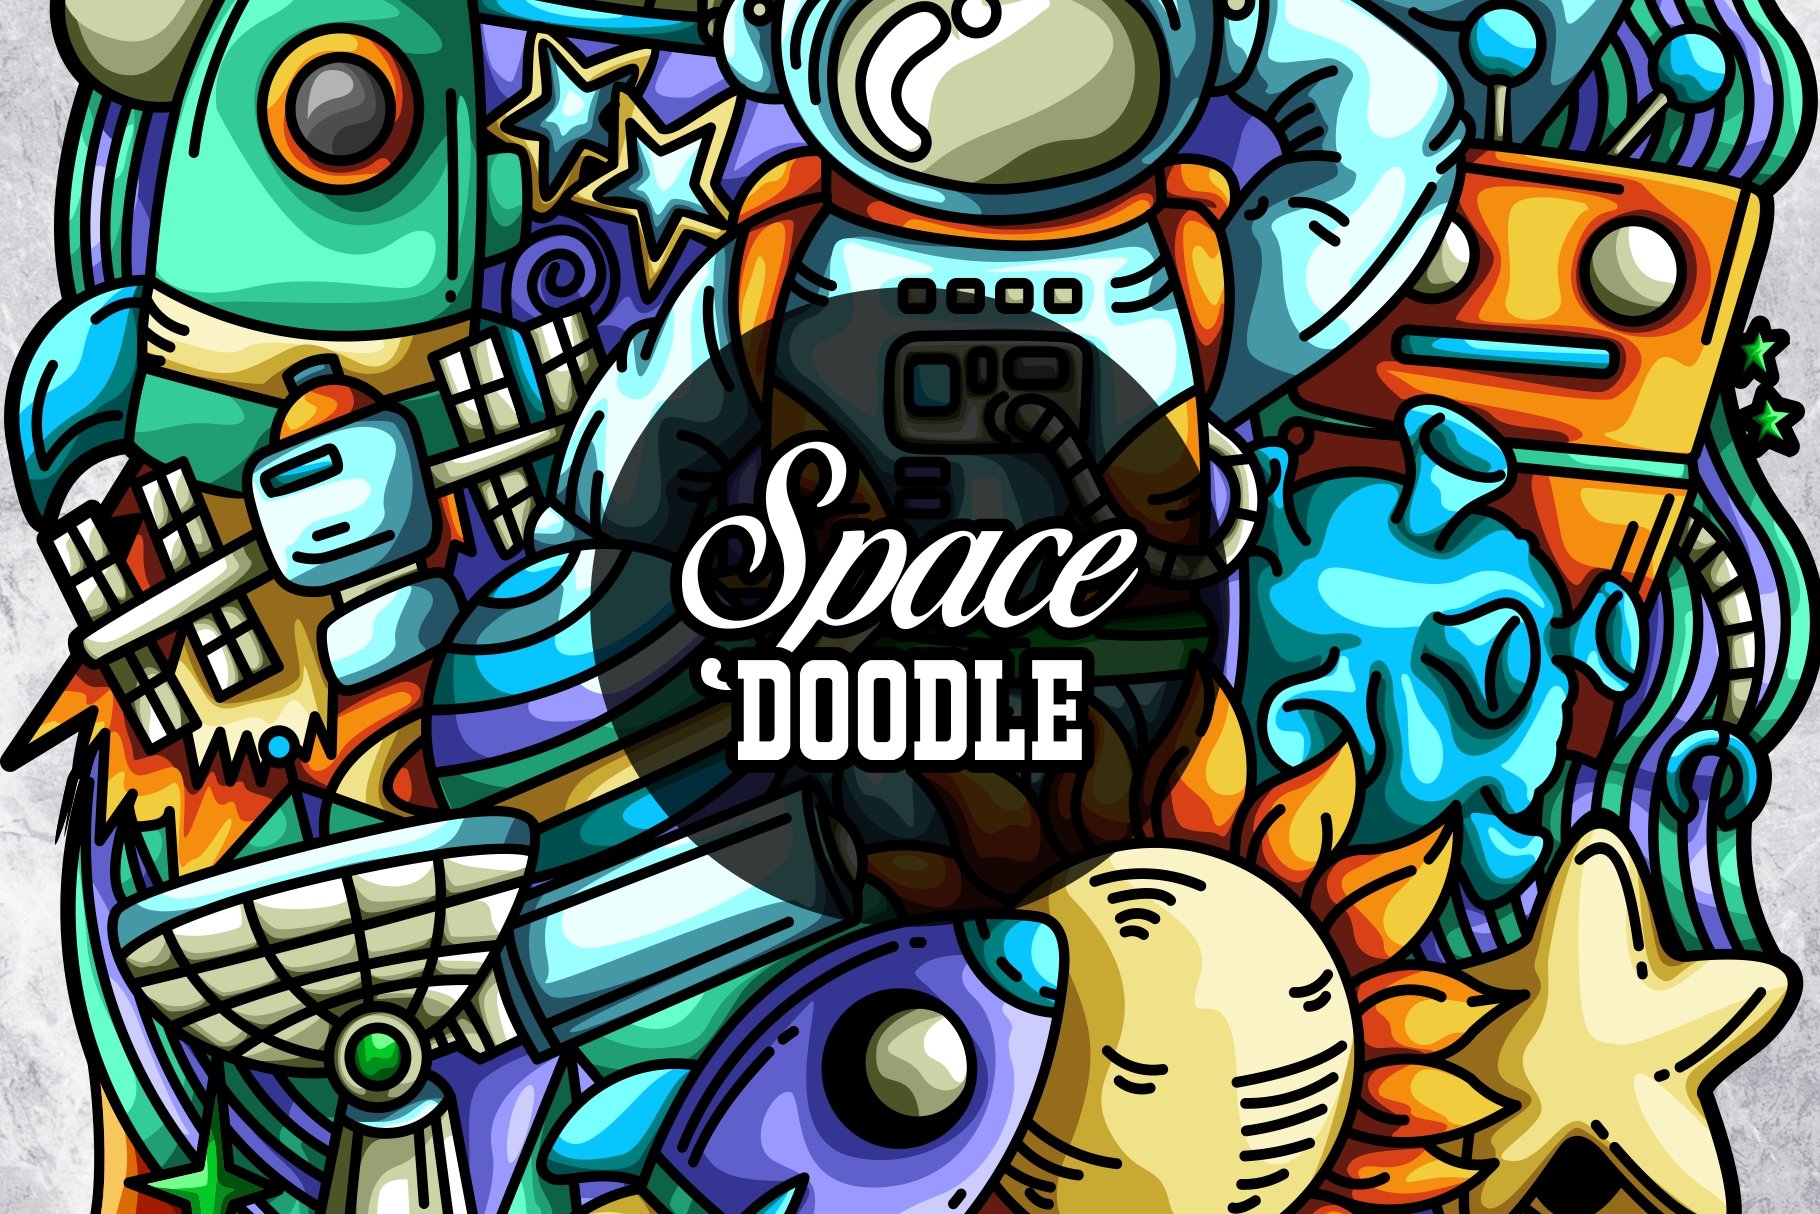 Space Doodle Illustrations cover image.